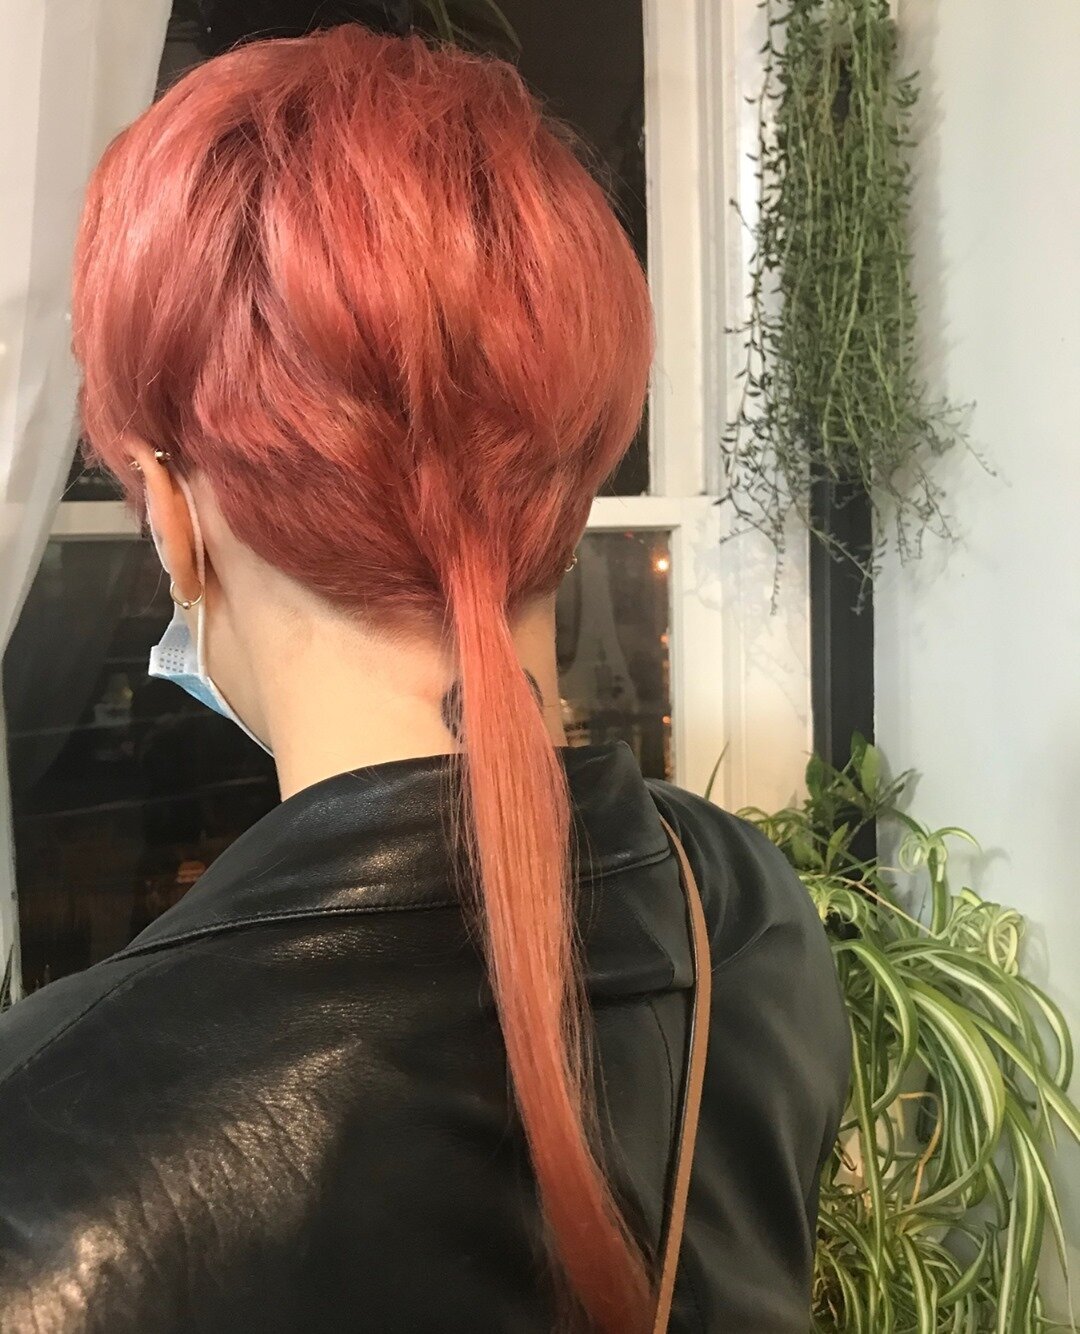 Rose gold rat tail flow.  I can't take all the credit.  My client was rocking the rat tail long before we met.⁠
⁠
#rosegold #faction8toner #rattailsofinstagram #kcmohair